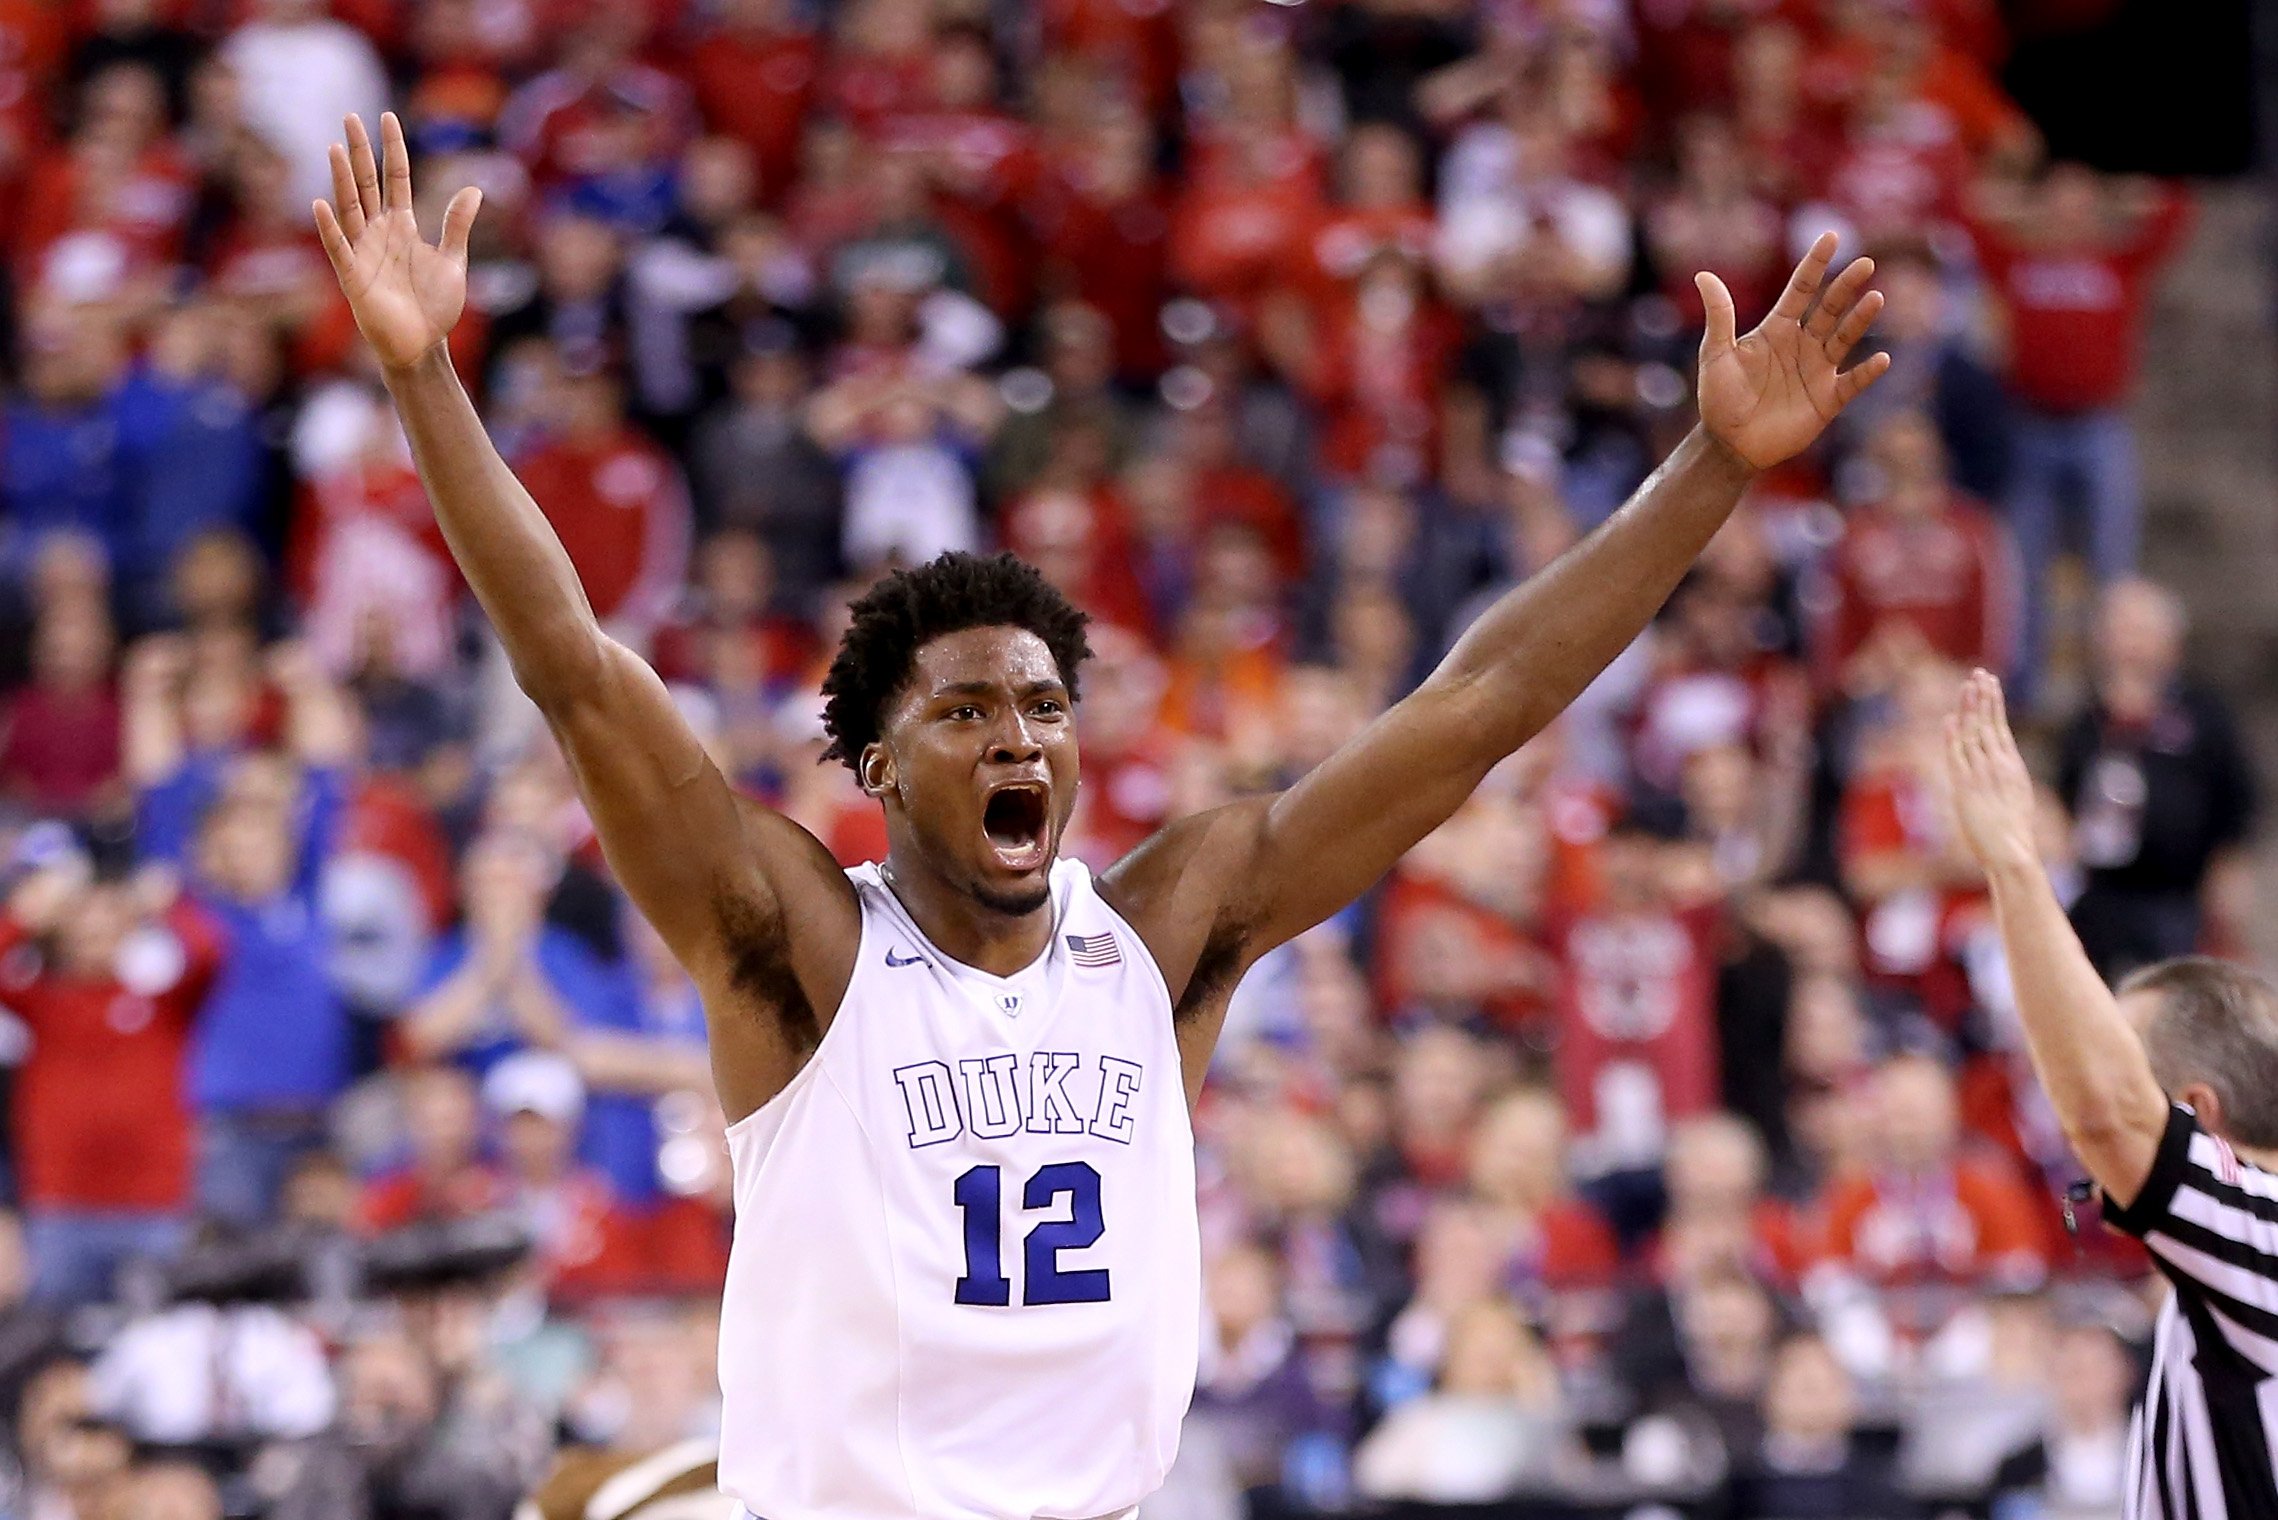 Justise Winslow of the Duke Blue Devils celebrates after defeating the Wisconsin Badgers during the NCAA Men's Final Four National Championship at Lucas Oil Stadium on April 6, 2015 in Indianapolis.